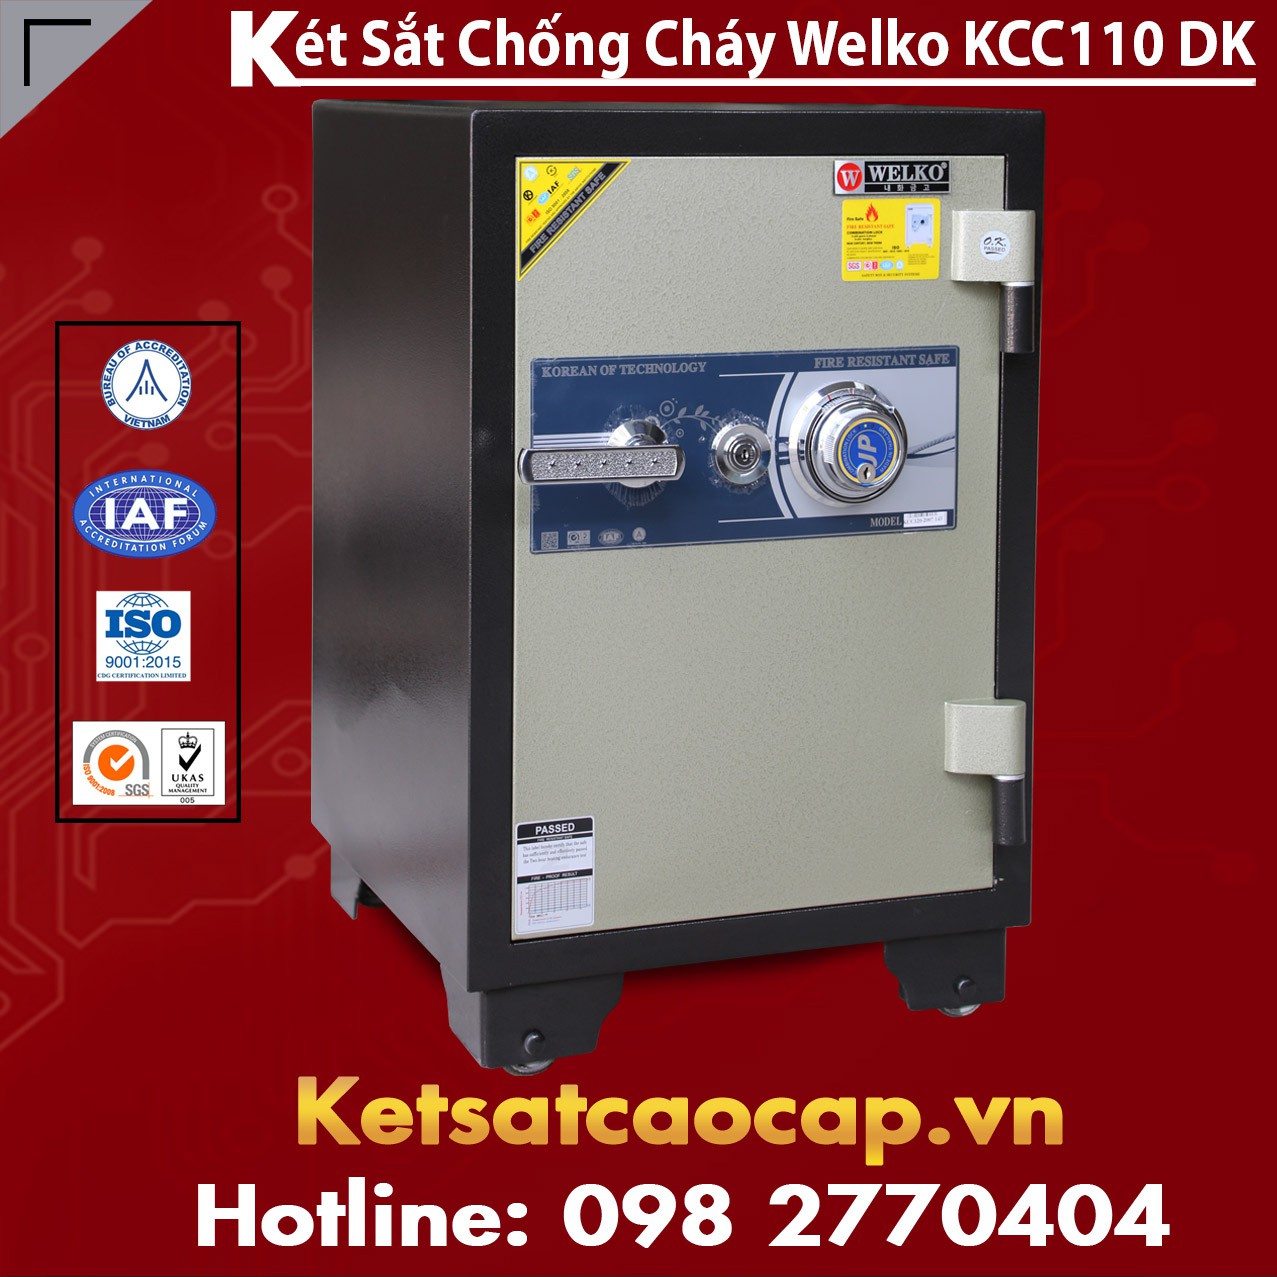 Hotel Safes Deposit Box Suppliers and Exporters Made In Viet Nam Sản Xuất Két Sắt Chống Đập